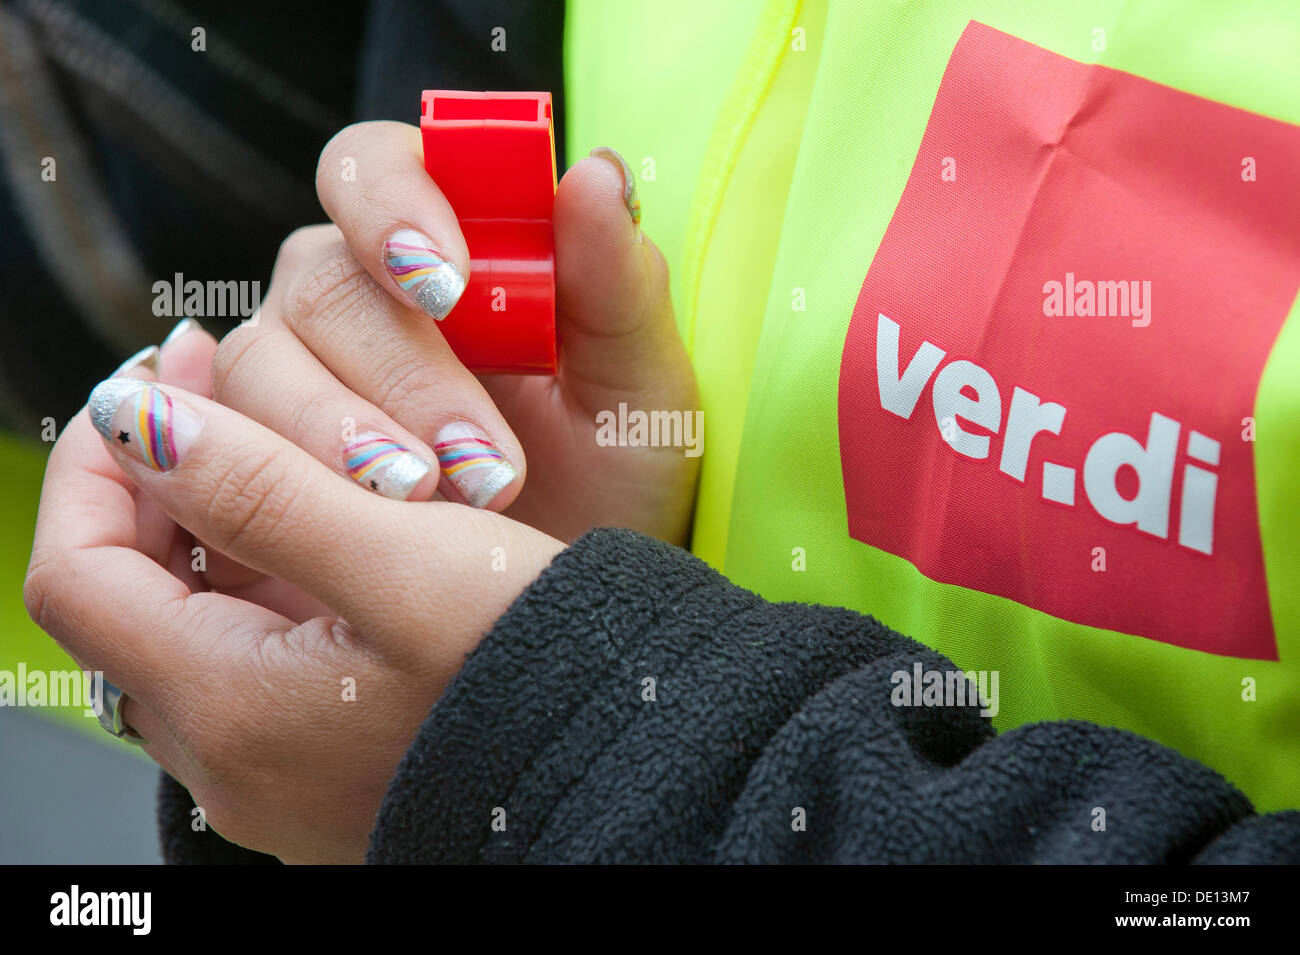 Woman holding a whistle wearing a high-viz jacked with the ver.di trade union logo Stock Photo